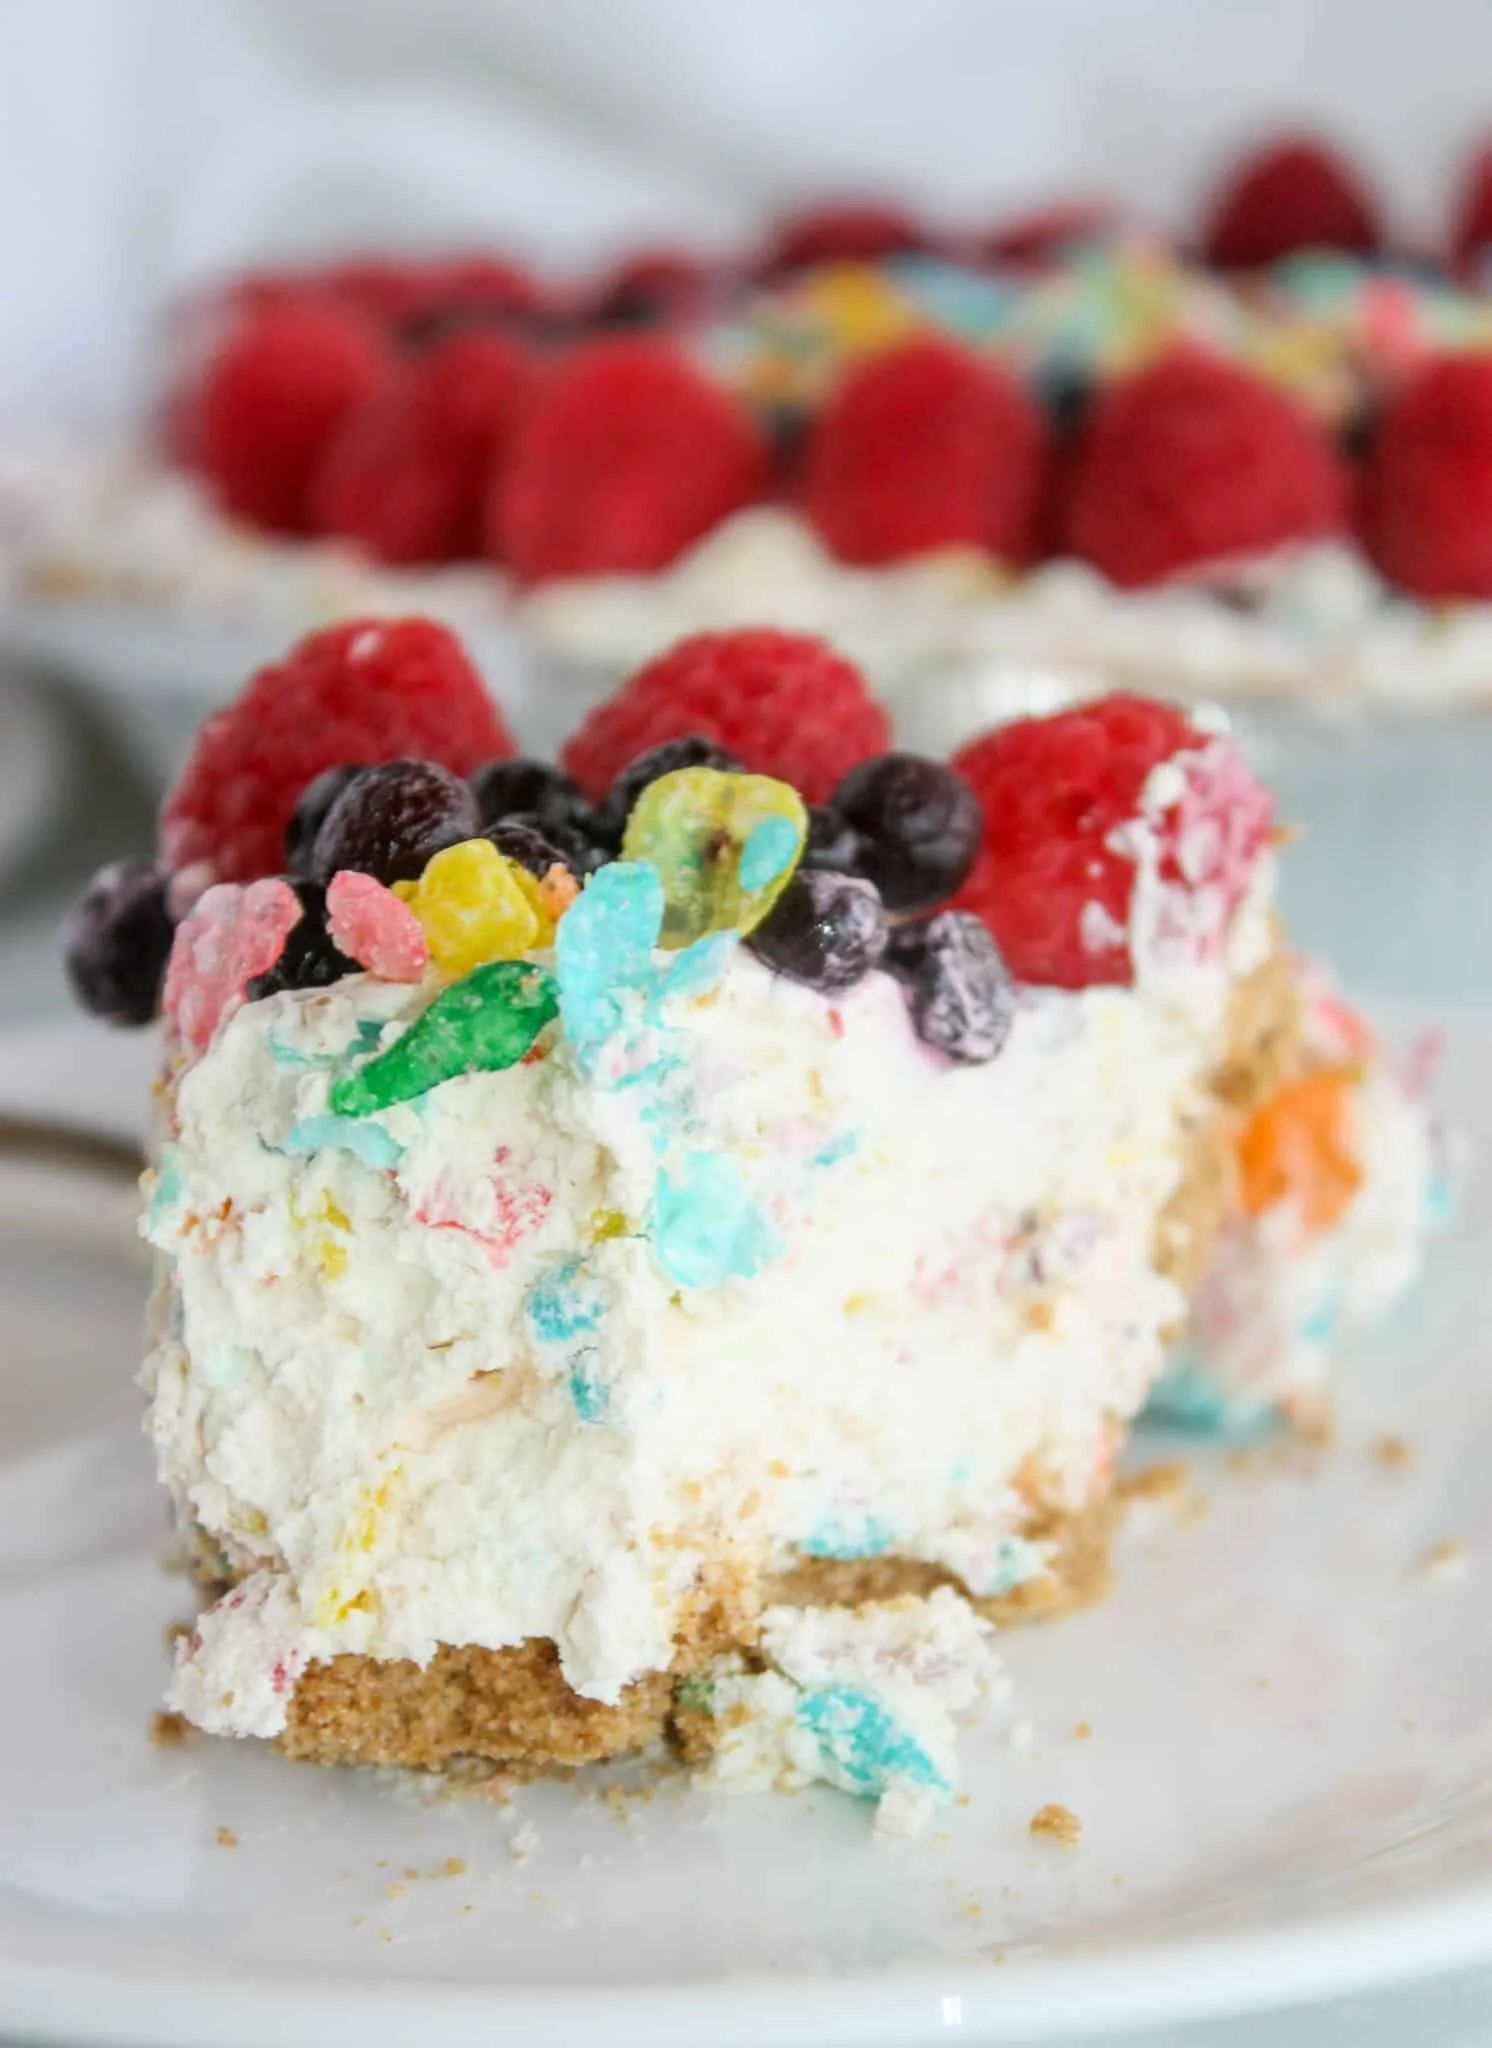 No Bake Fruity Pebbles Cheesecake is a colourful, delicious dessert option.  This gluten free, dairy reduced version is loaded with flavour as well as being pleasing to the eye.